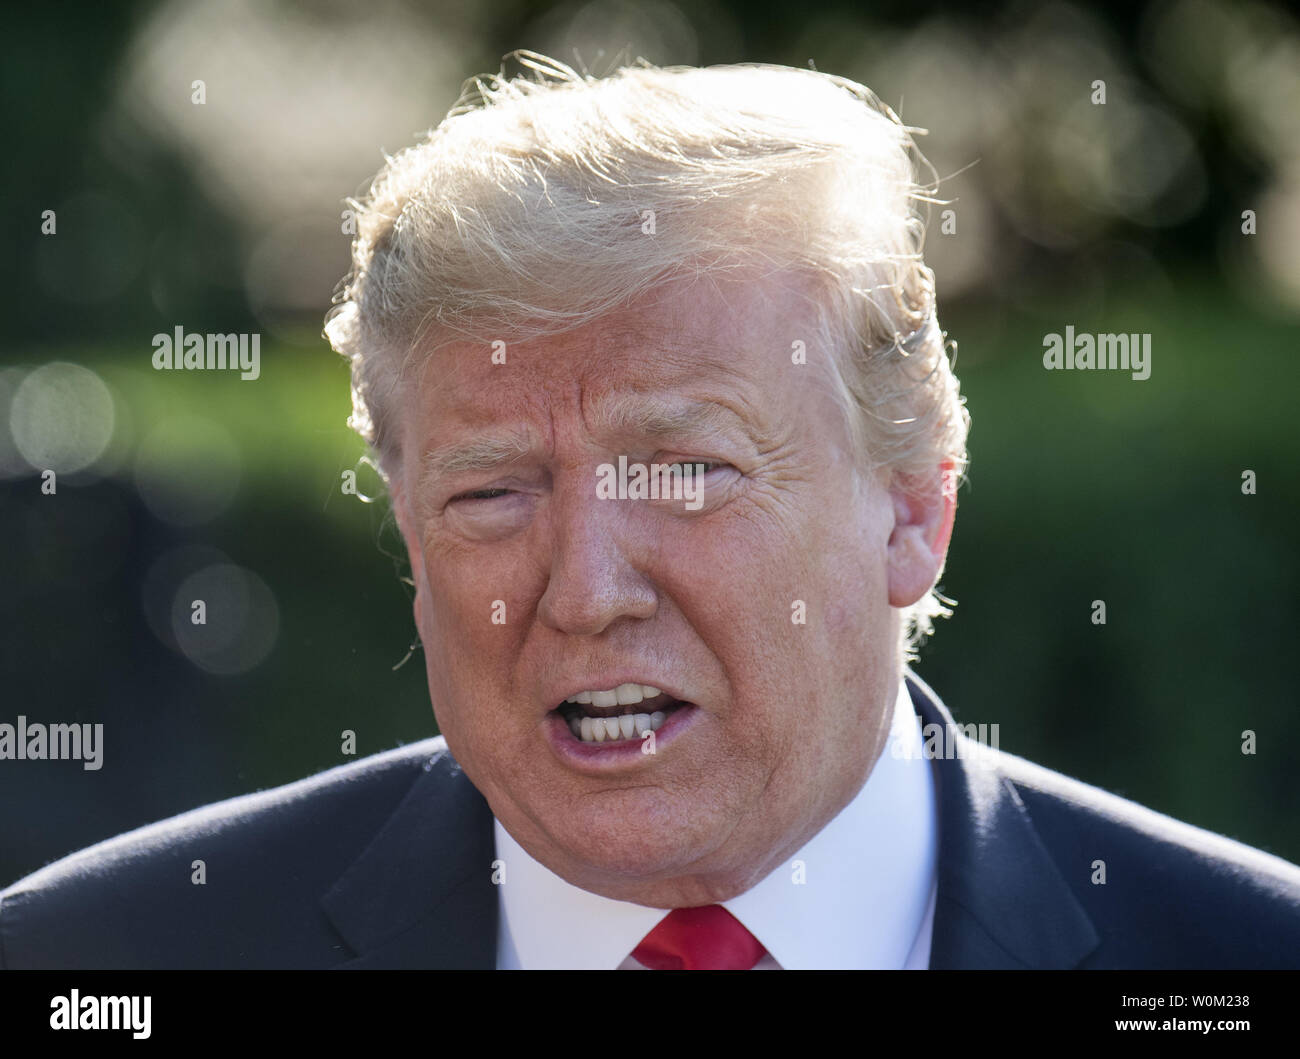 President Donald Trump reacts to a reporter's question during a press conference prior to departing via Marine One on the South Lawn of the White House in Washington, DC on May 30, 2019.   The president gave his interpretations the remarks by Robert Mueller on the probe into Russian interference in the 2016 election.  He will be in Colorado for the day.     Photo by Pat Benic/UPI Stock Photo